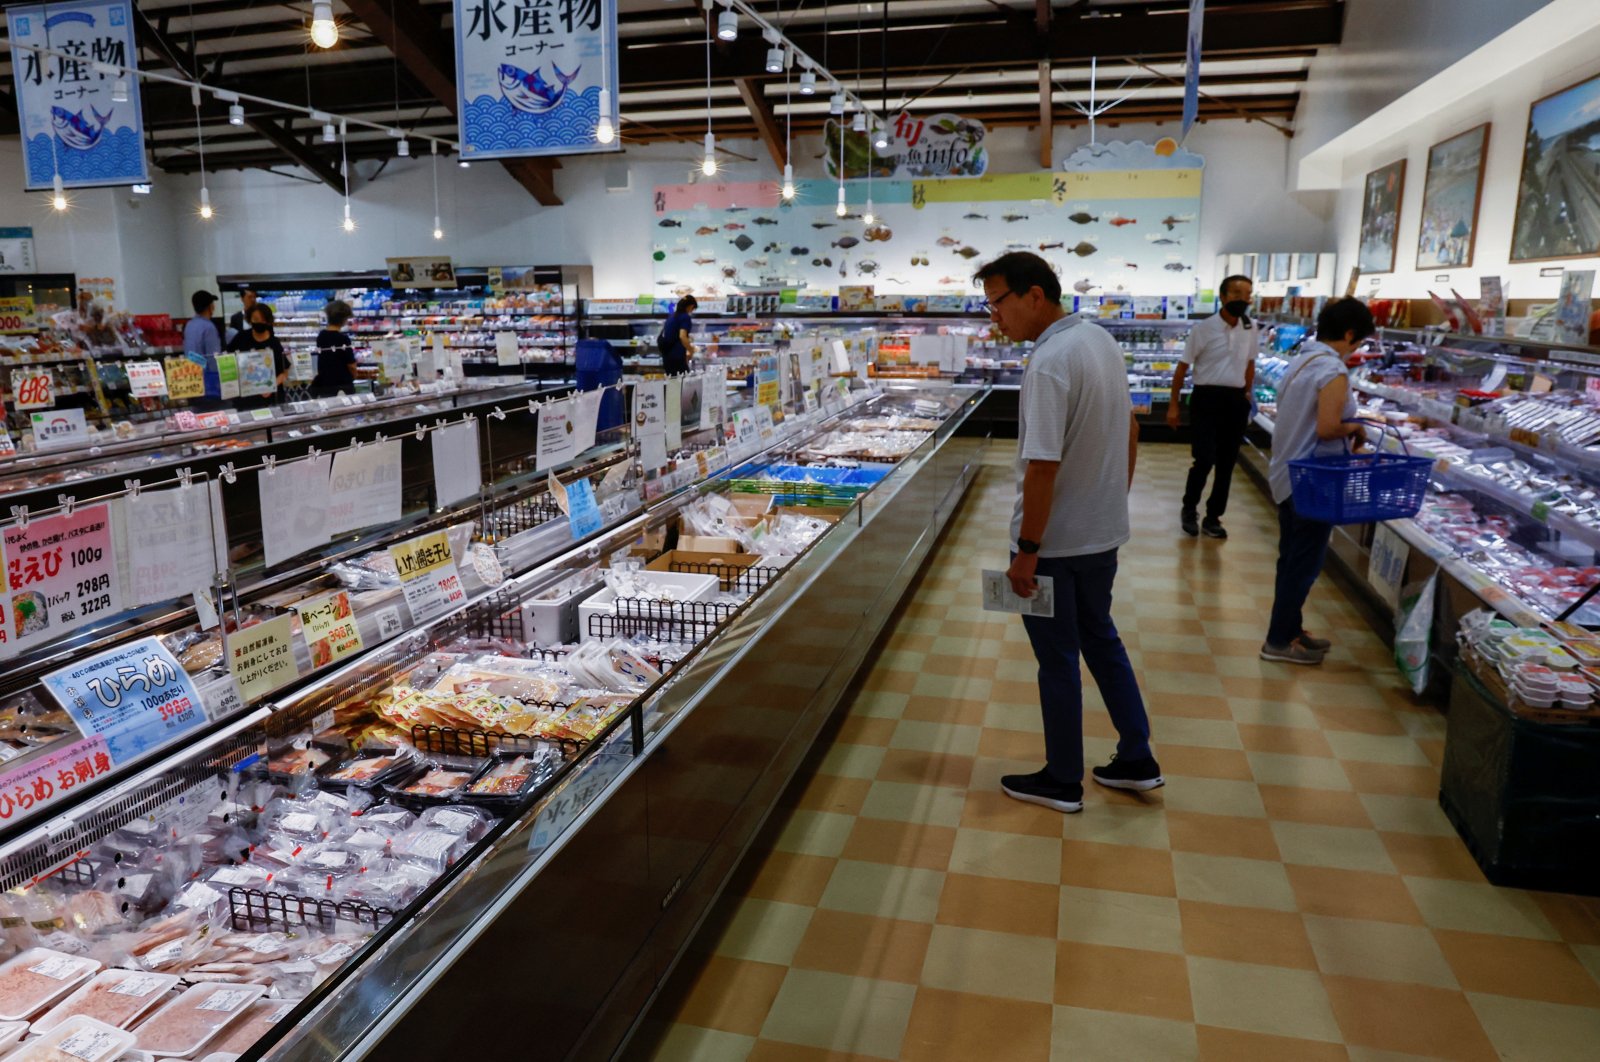 Customers browse through locally caught seafood at the Hamanoeki Fish Market and Food Court in Soma, Fukushima Prefecture, Japan, Aug. 31, 2023. (Reuters Photo)